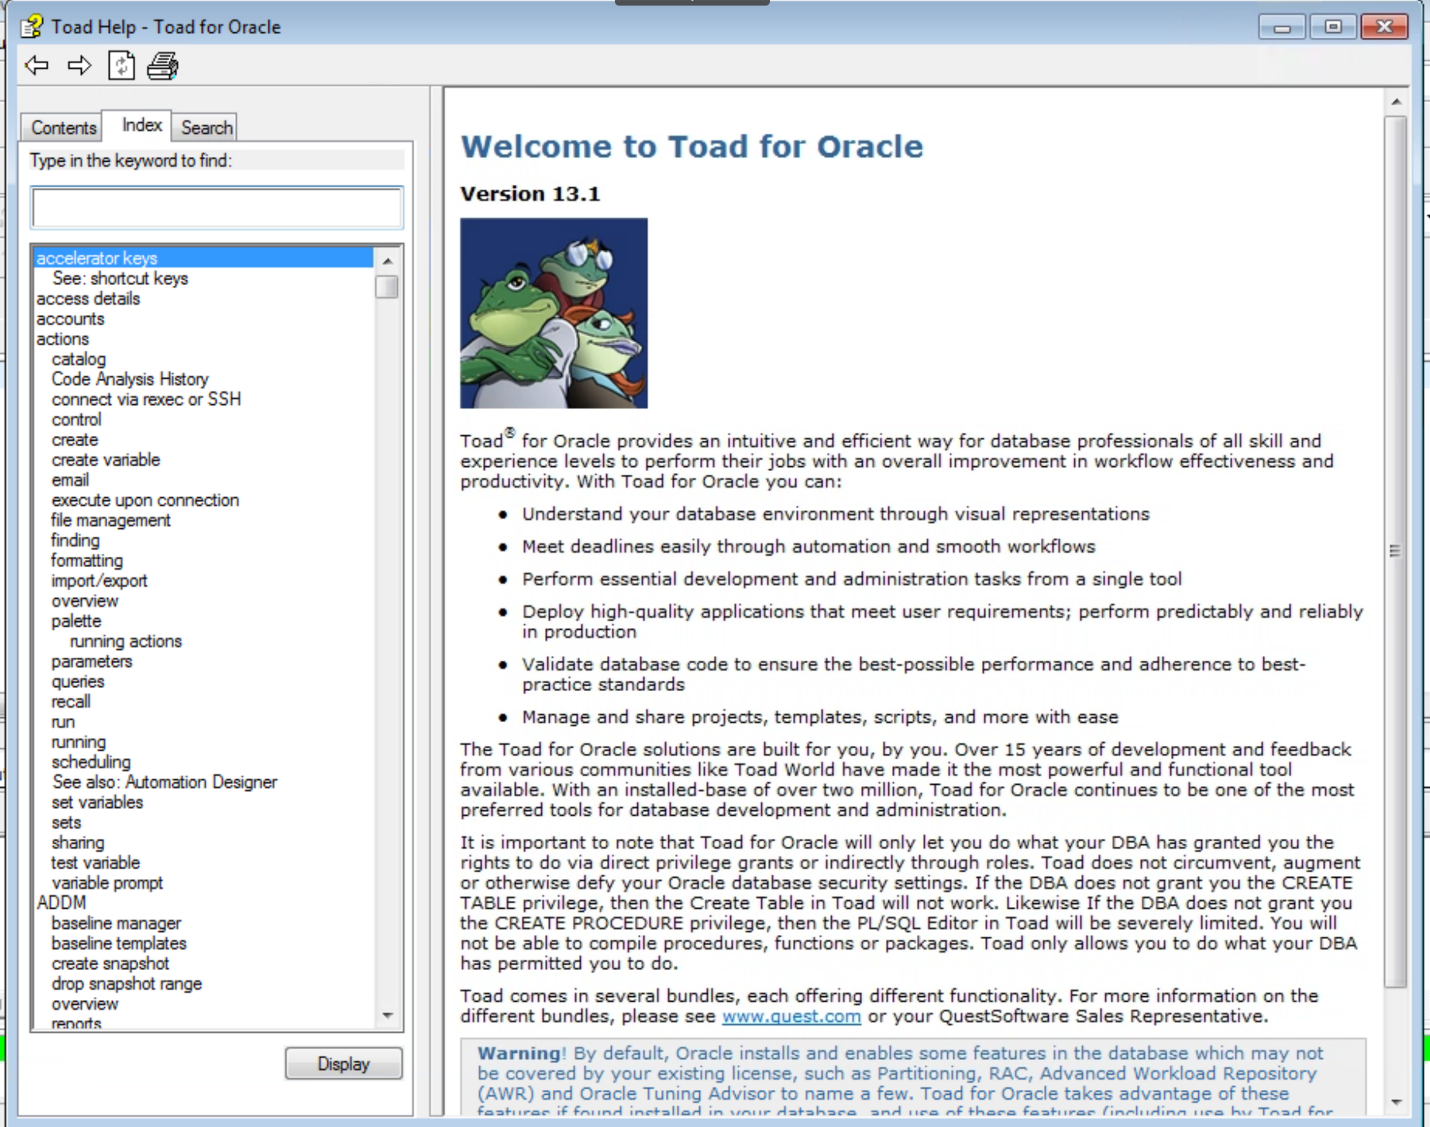 Figure 4. The Toad for Oracle Help Index tab